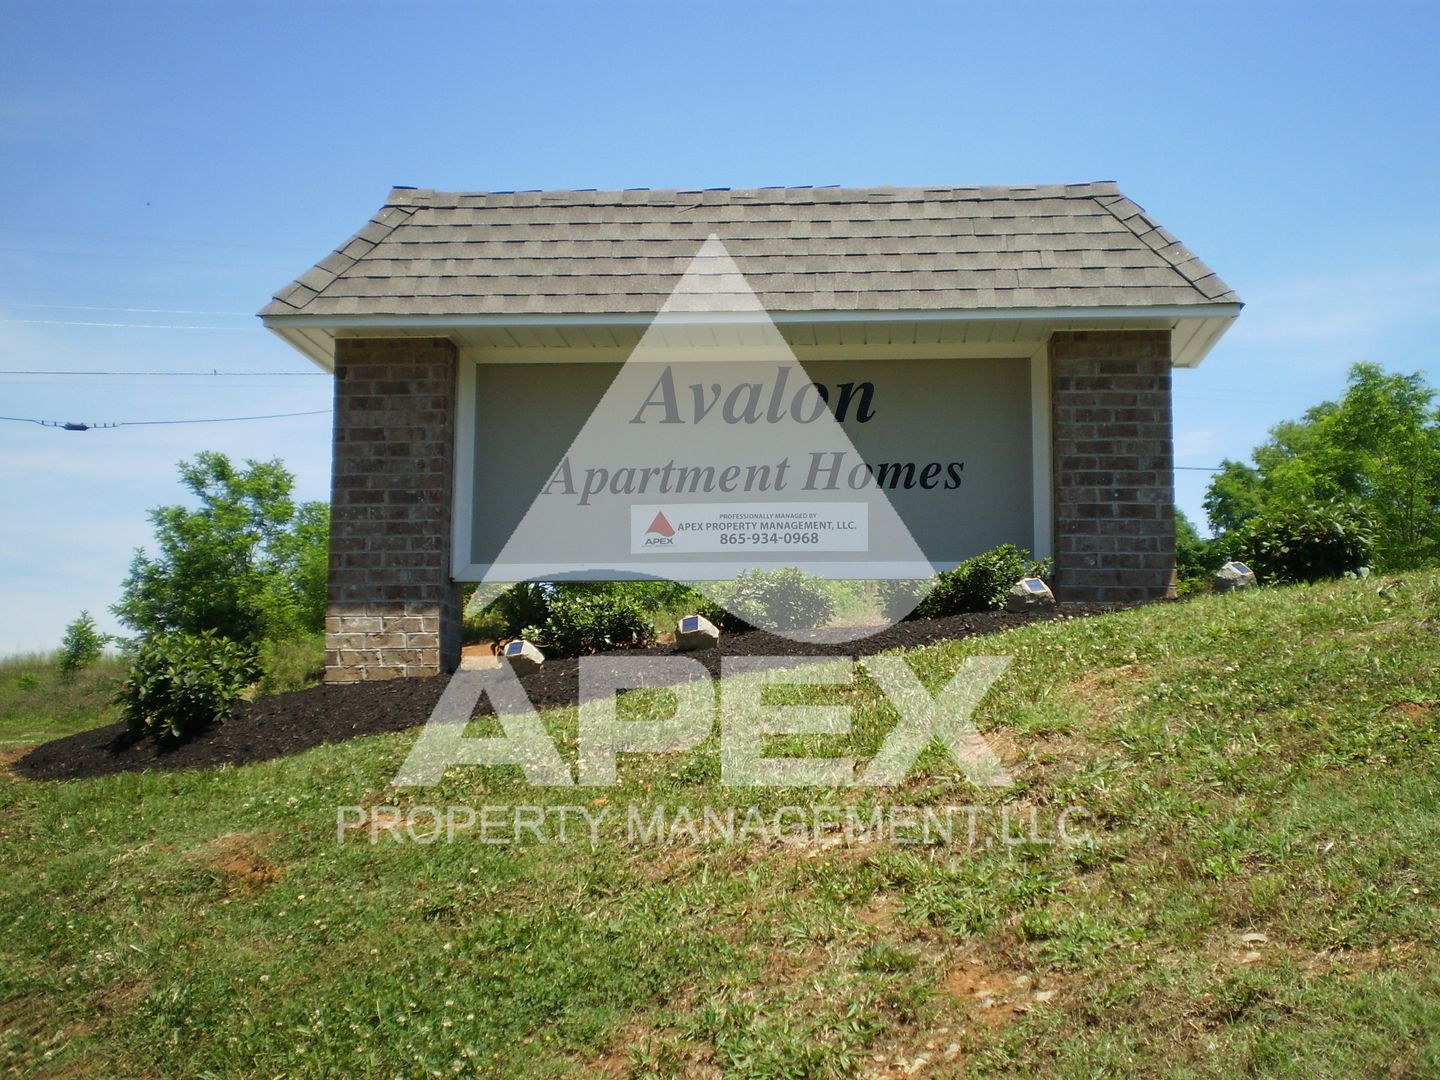 MOVE-IN SPECIAL!! NO RENT UNTIL JULY 1ST 2024!  AVALON APARTMENT HOMES---NICE--2BD - 1BA Apartment off Topside Road with convenient access to Maryville or Knoxville!